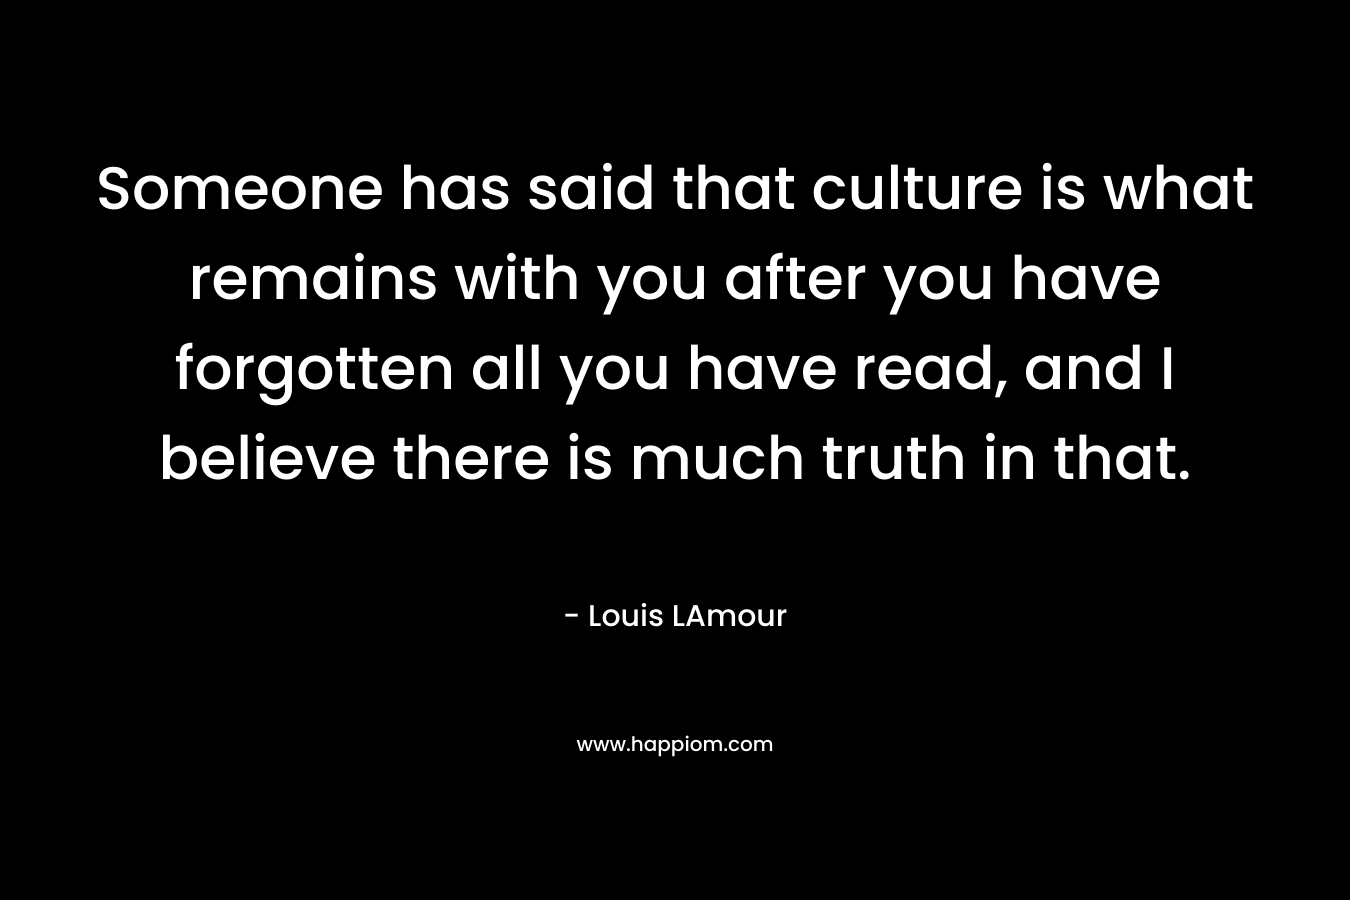 Someone has said that culture is what remains with you after you have forgotten all you have read, and I believe there is much truth in that.